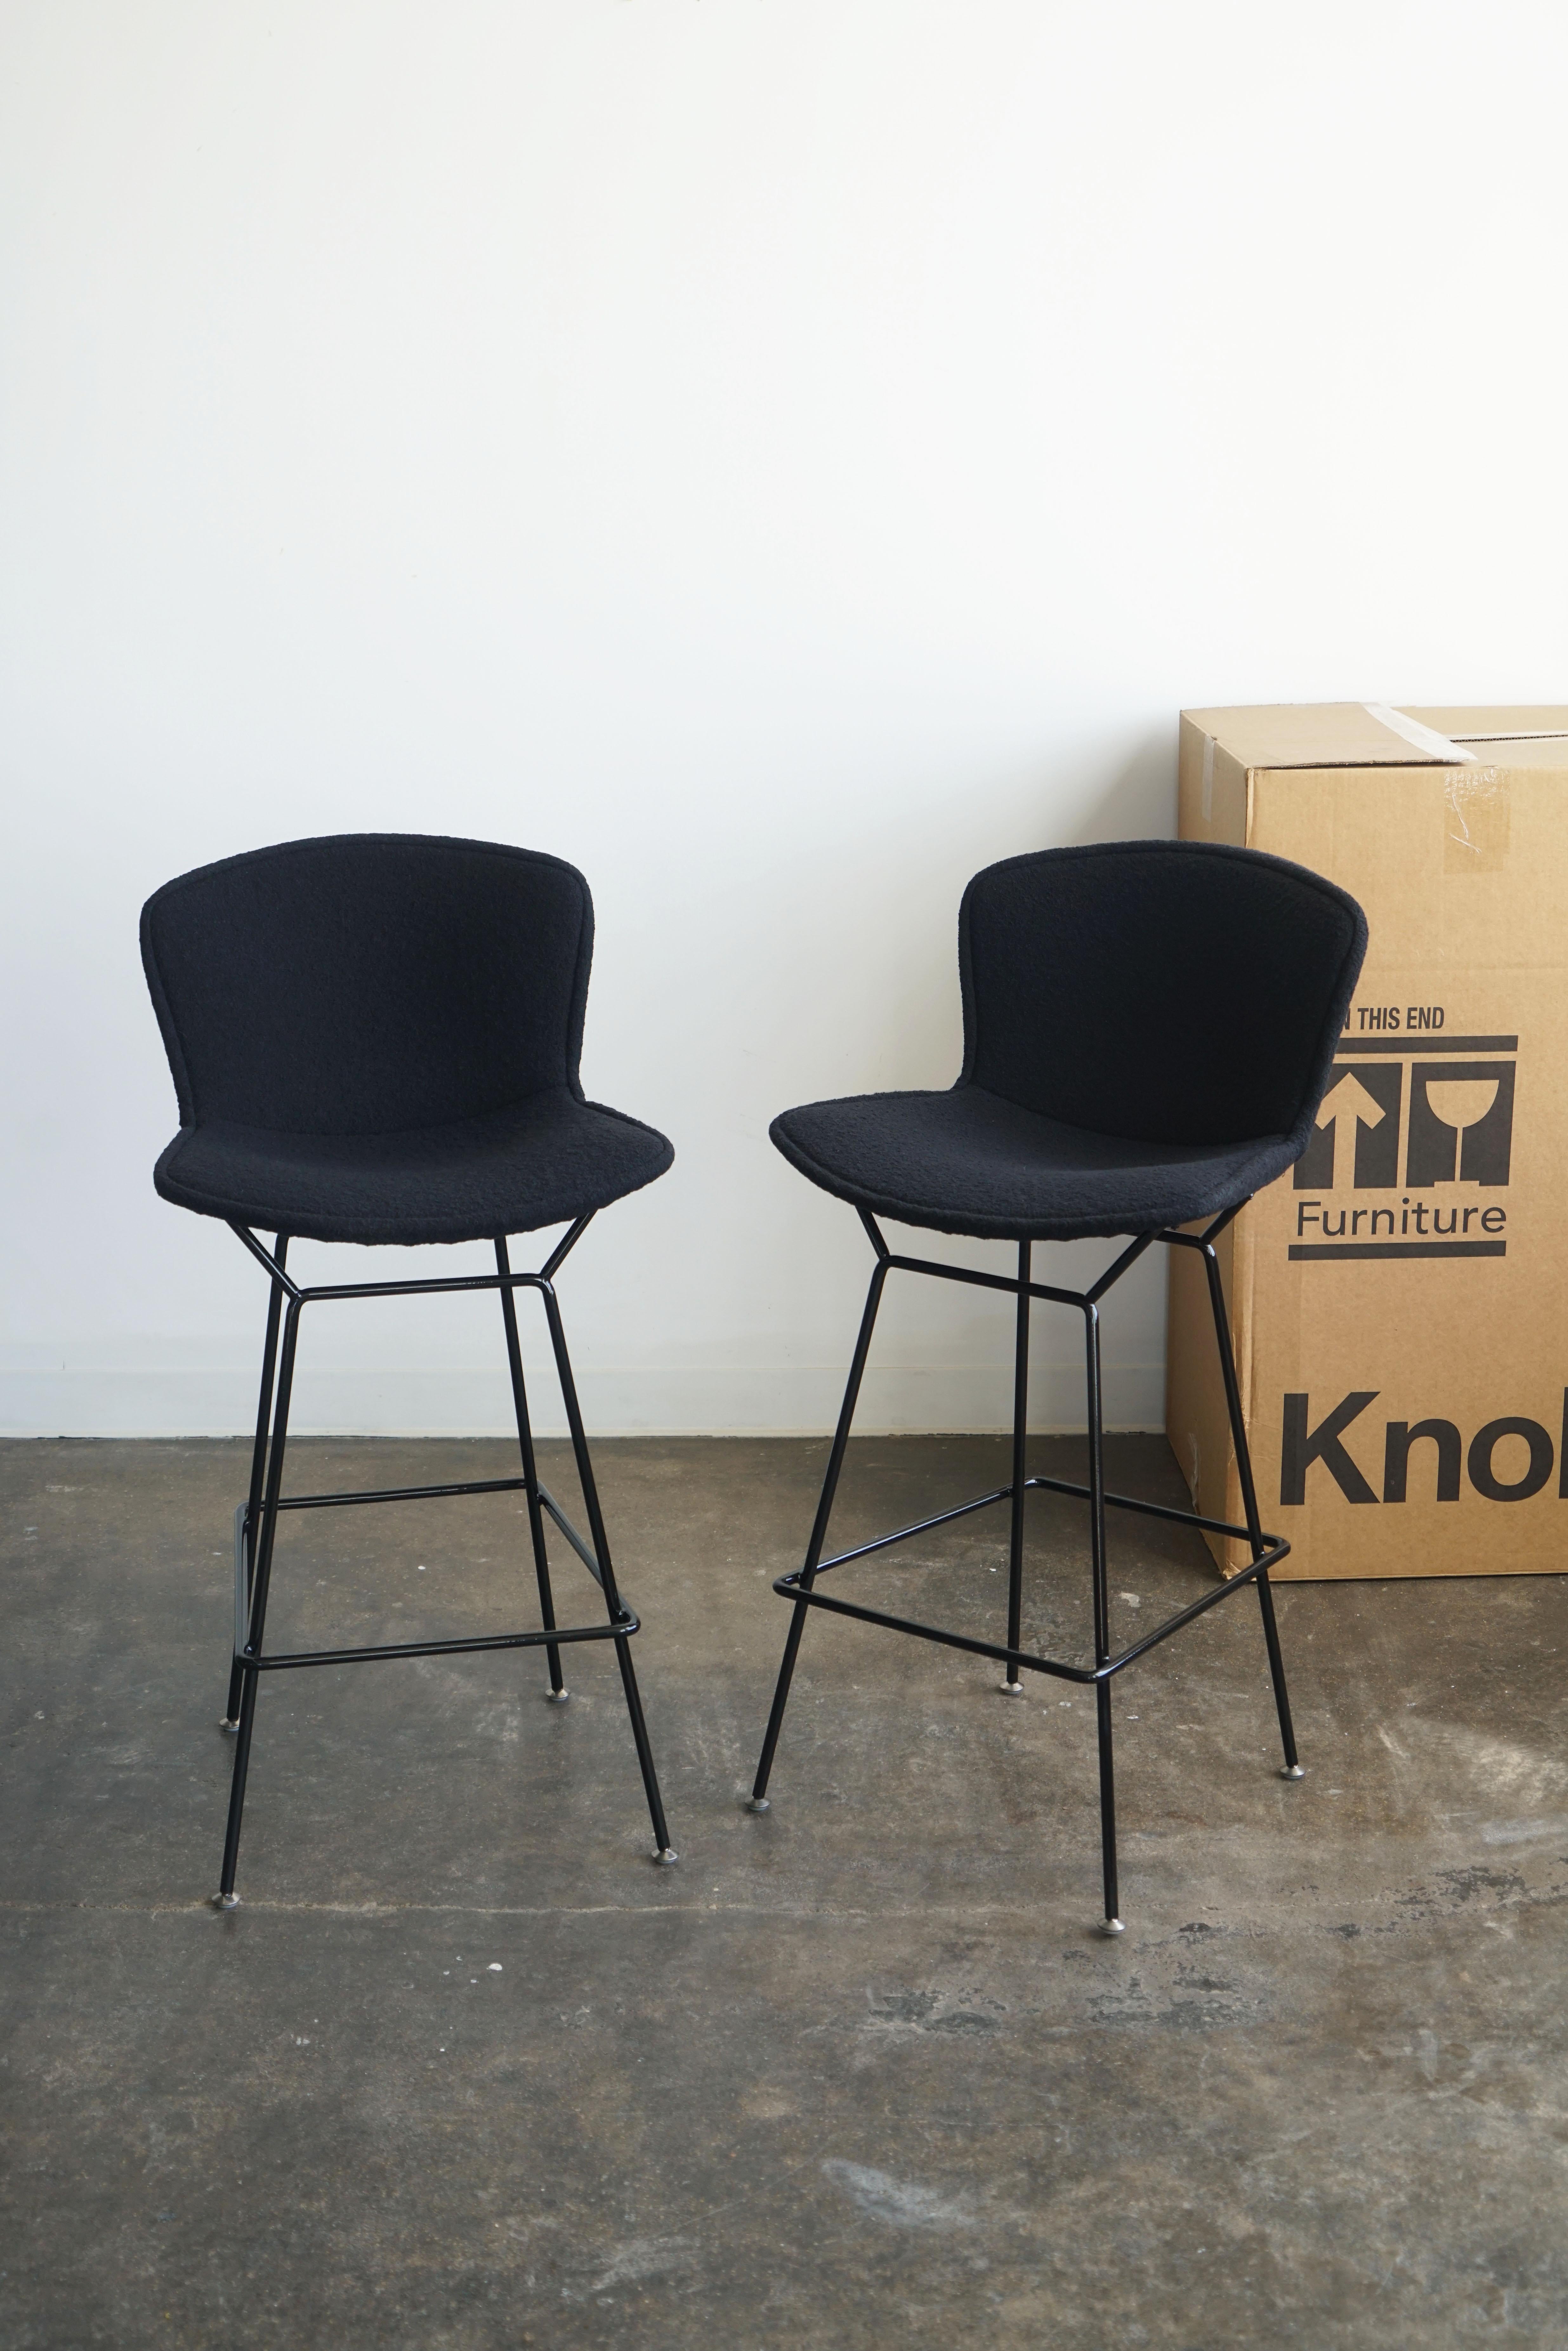 Set of 2
Knoll Bertoia bar height stools in black frame
with black 